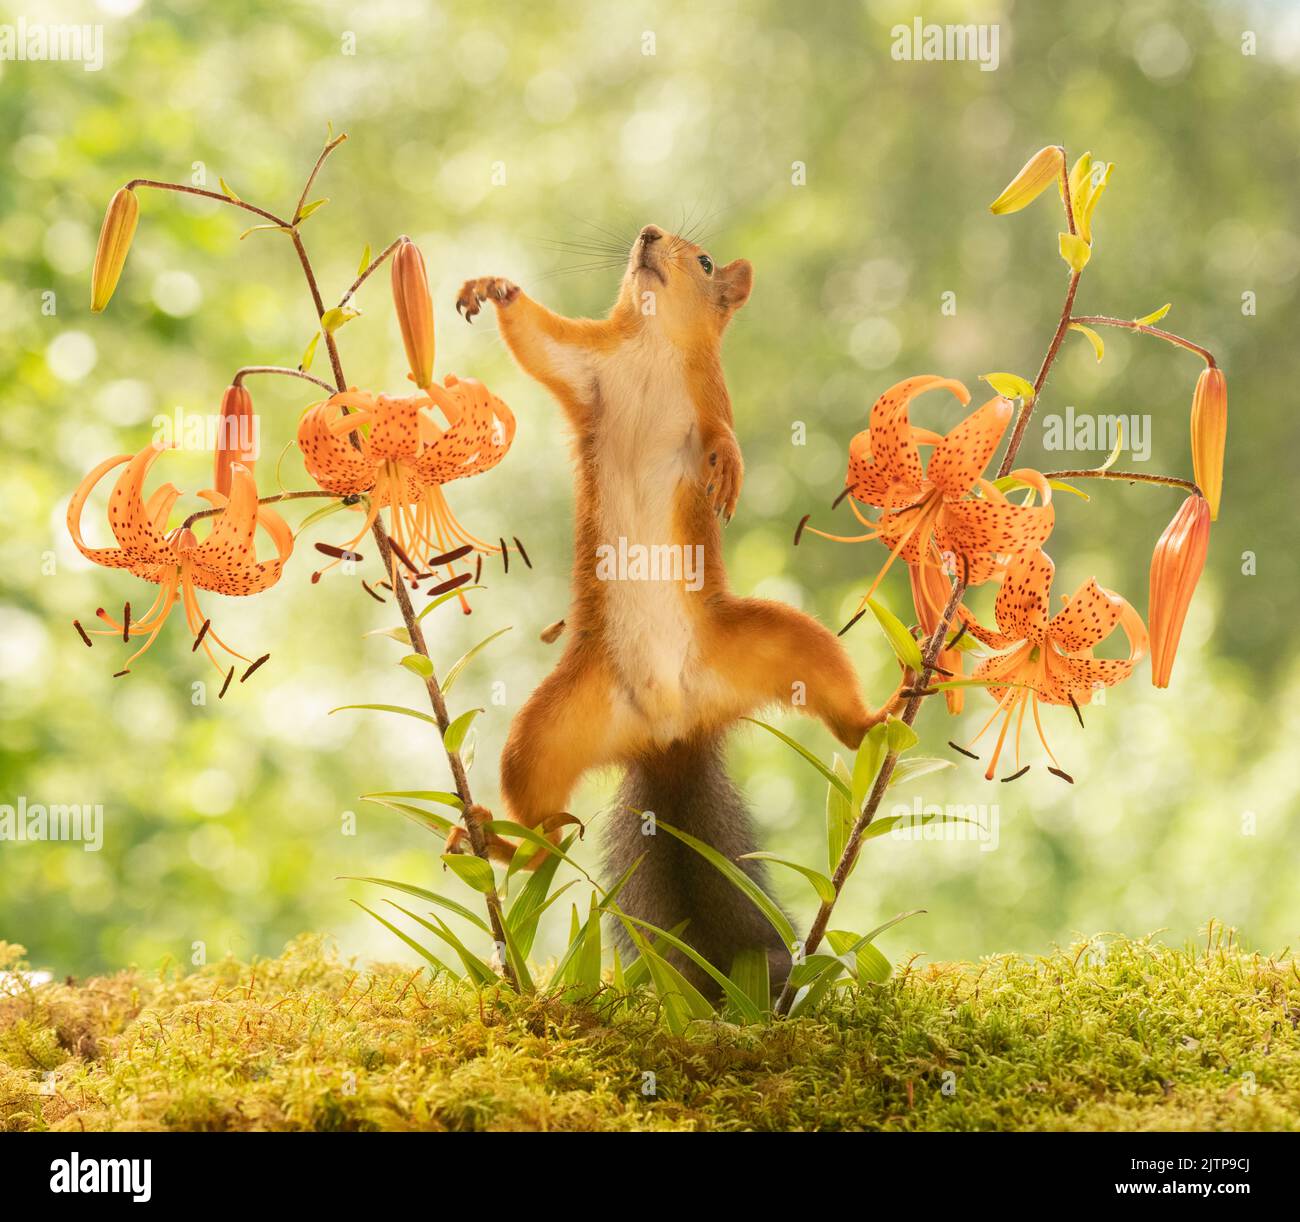 red squirrel is standing between tiger lily flowers Stock Photo